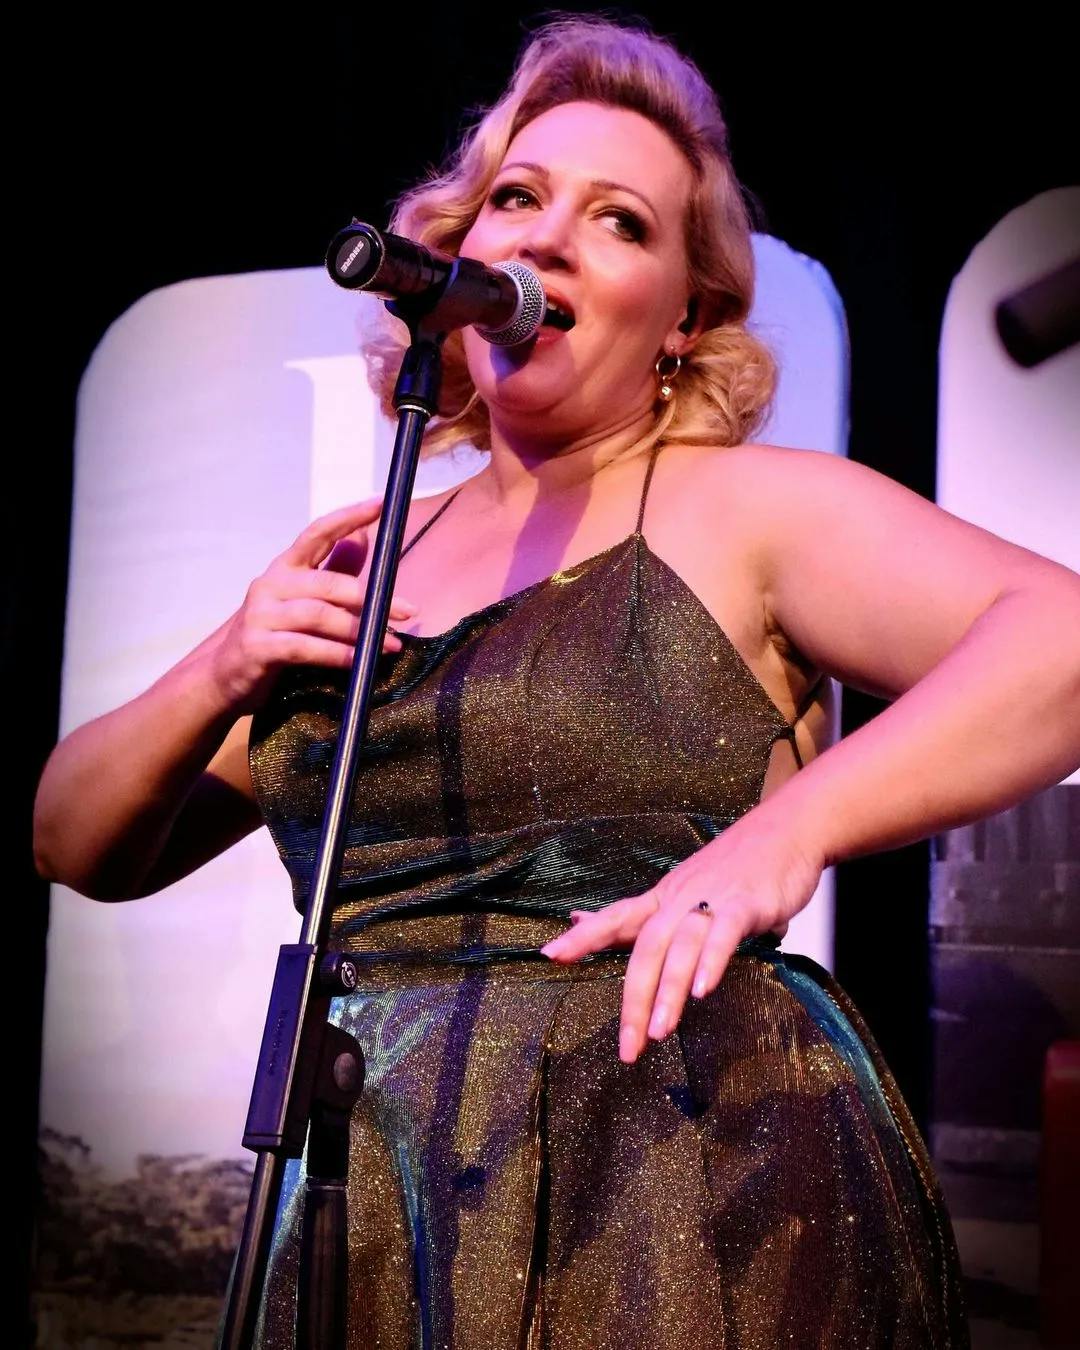 A woman with blonde hair performs on stage, singing into a microphone. She is wearing a shimmery, metallic dress and appears to be in the middle of a dynamic performance, her hand elegantly resting on her chest. The background is dark with some illuminated signage.